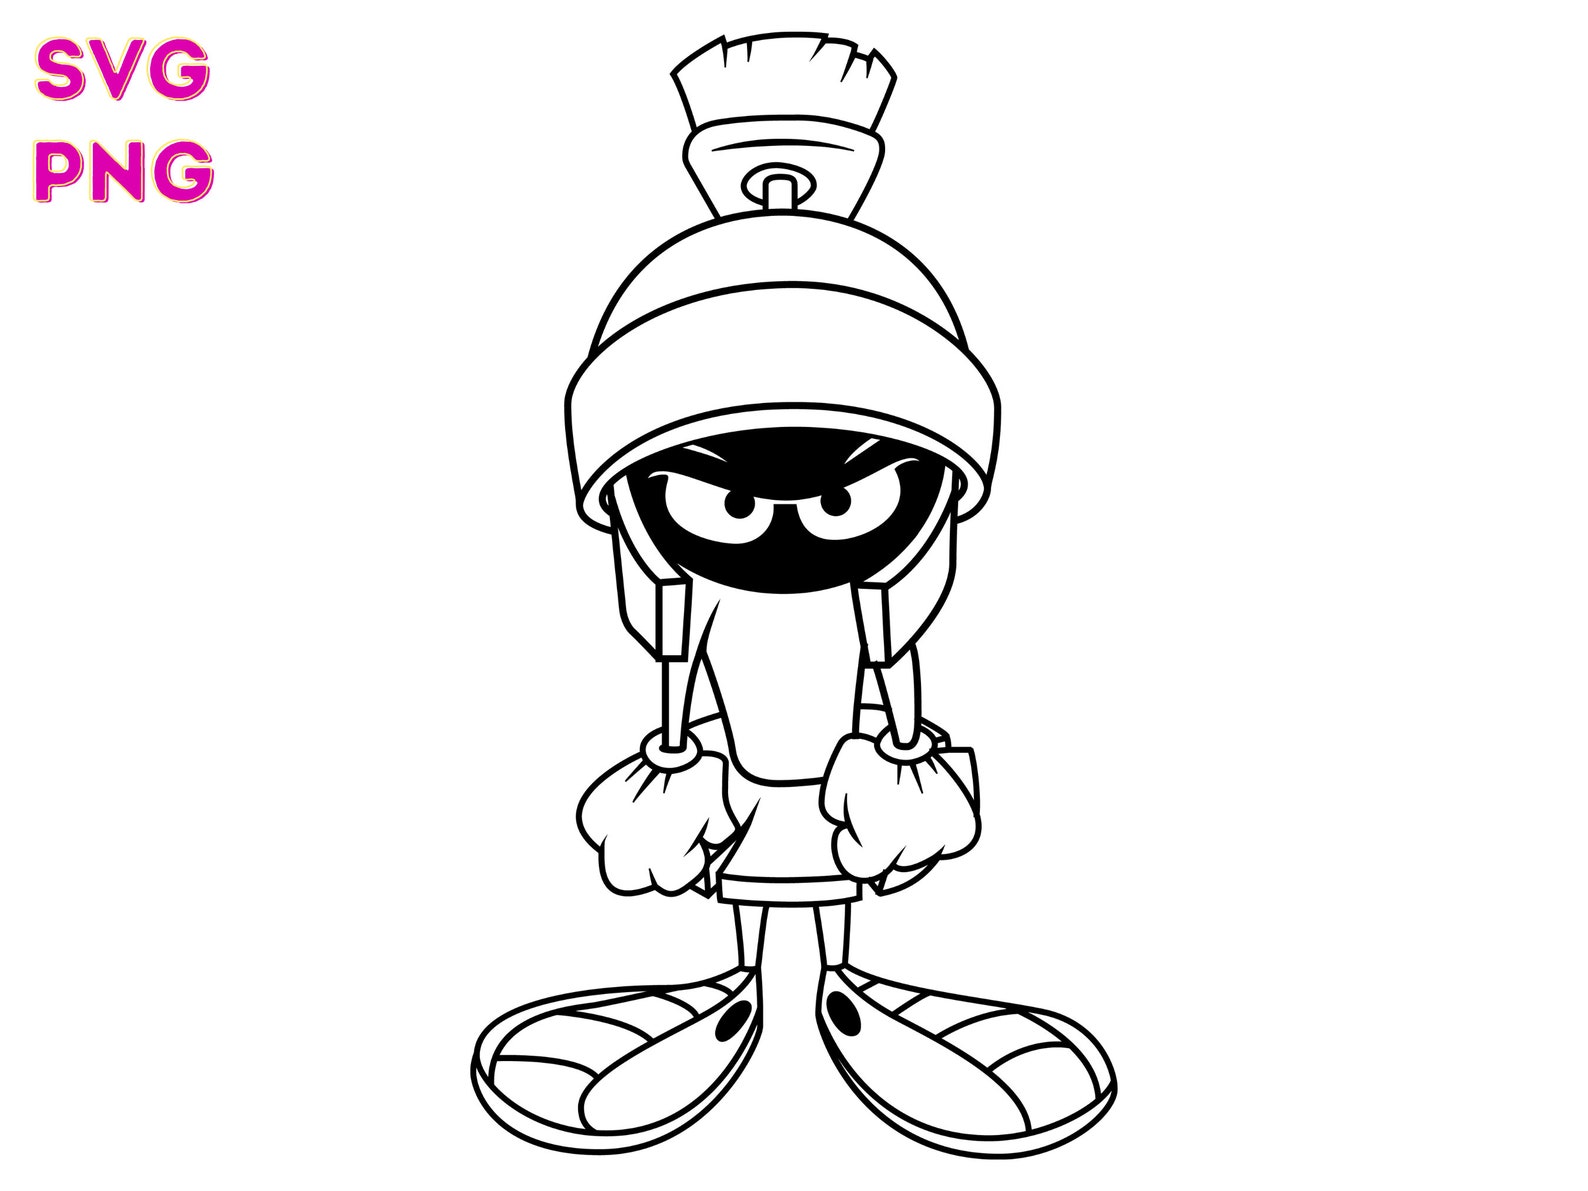 Marvin the Martian Black and White Looney Tunes SVG Digital | Etsy